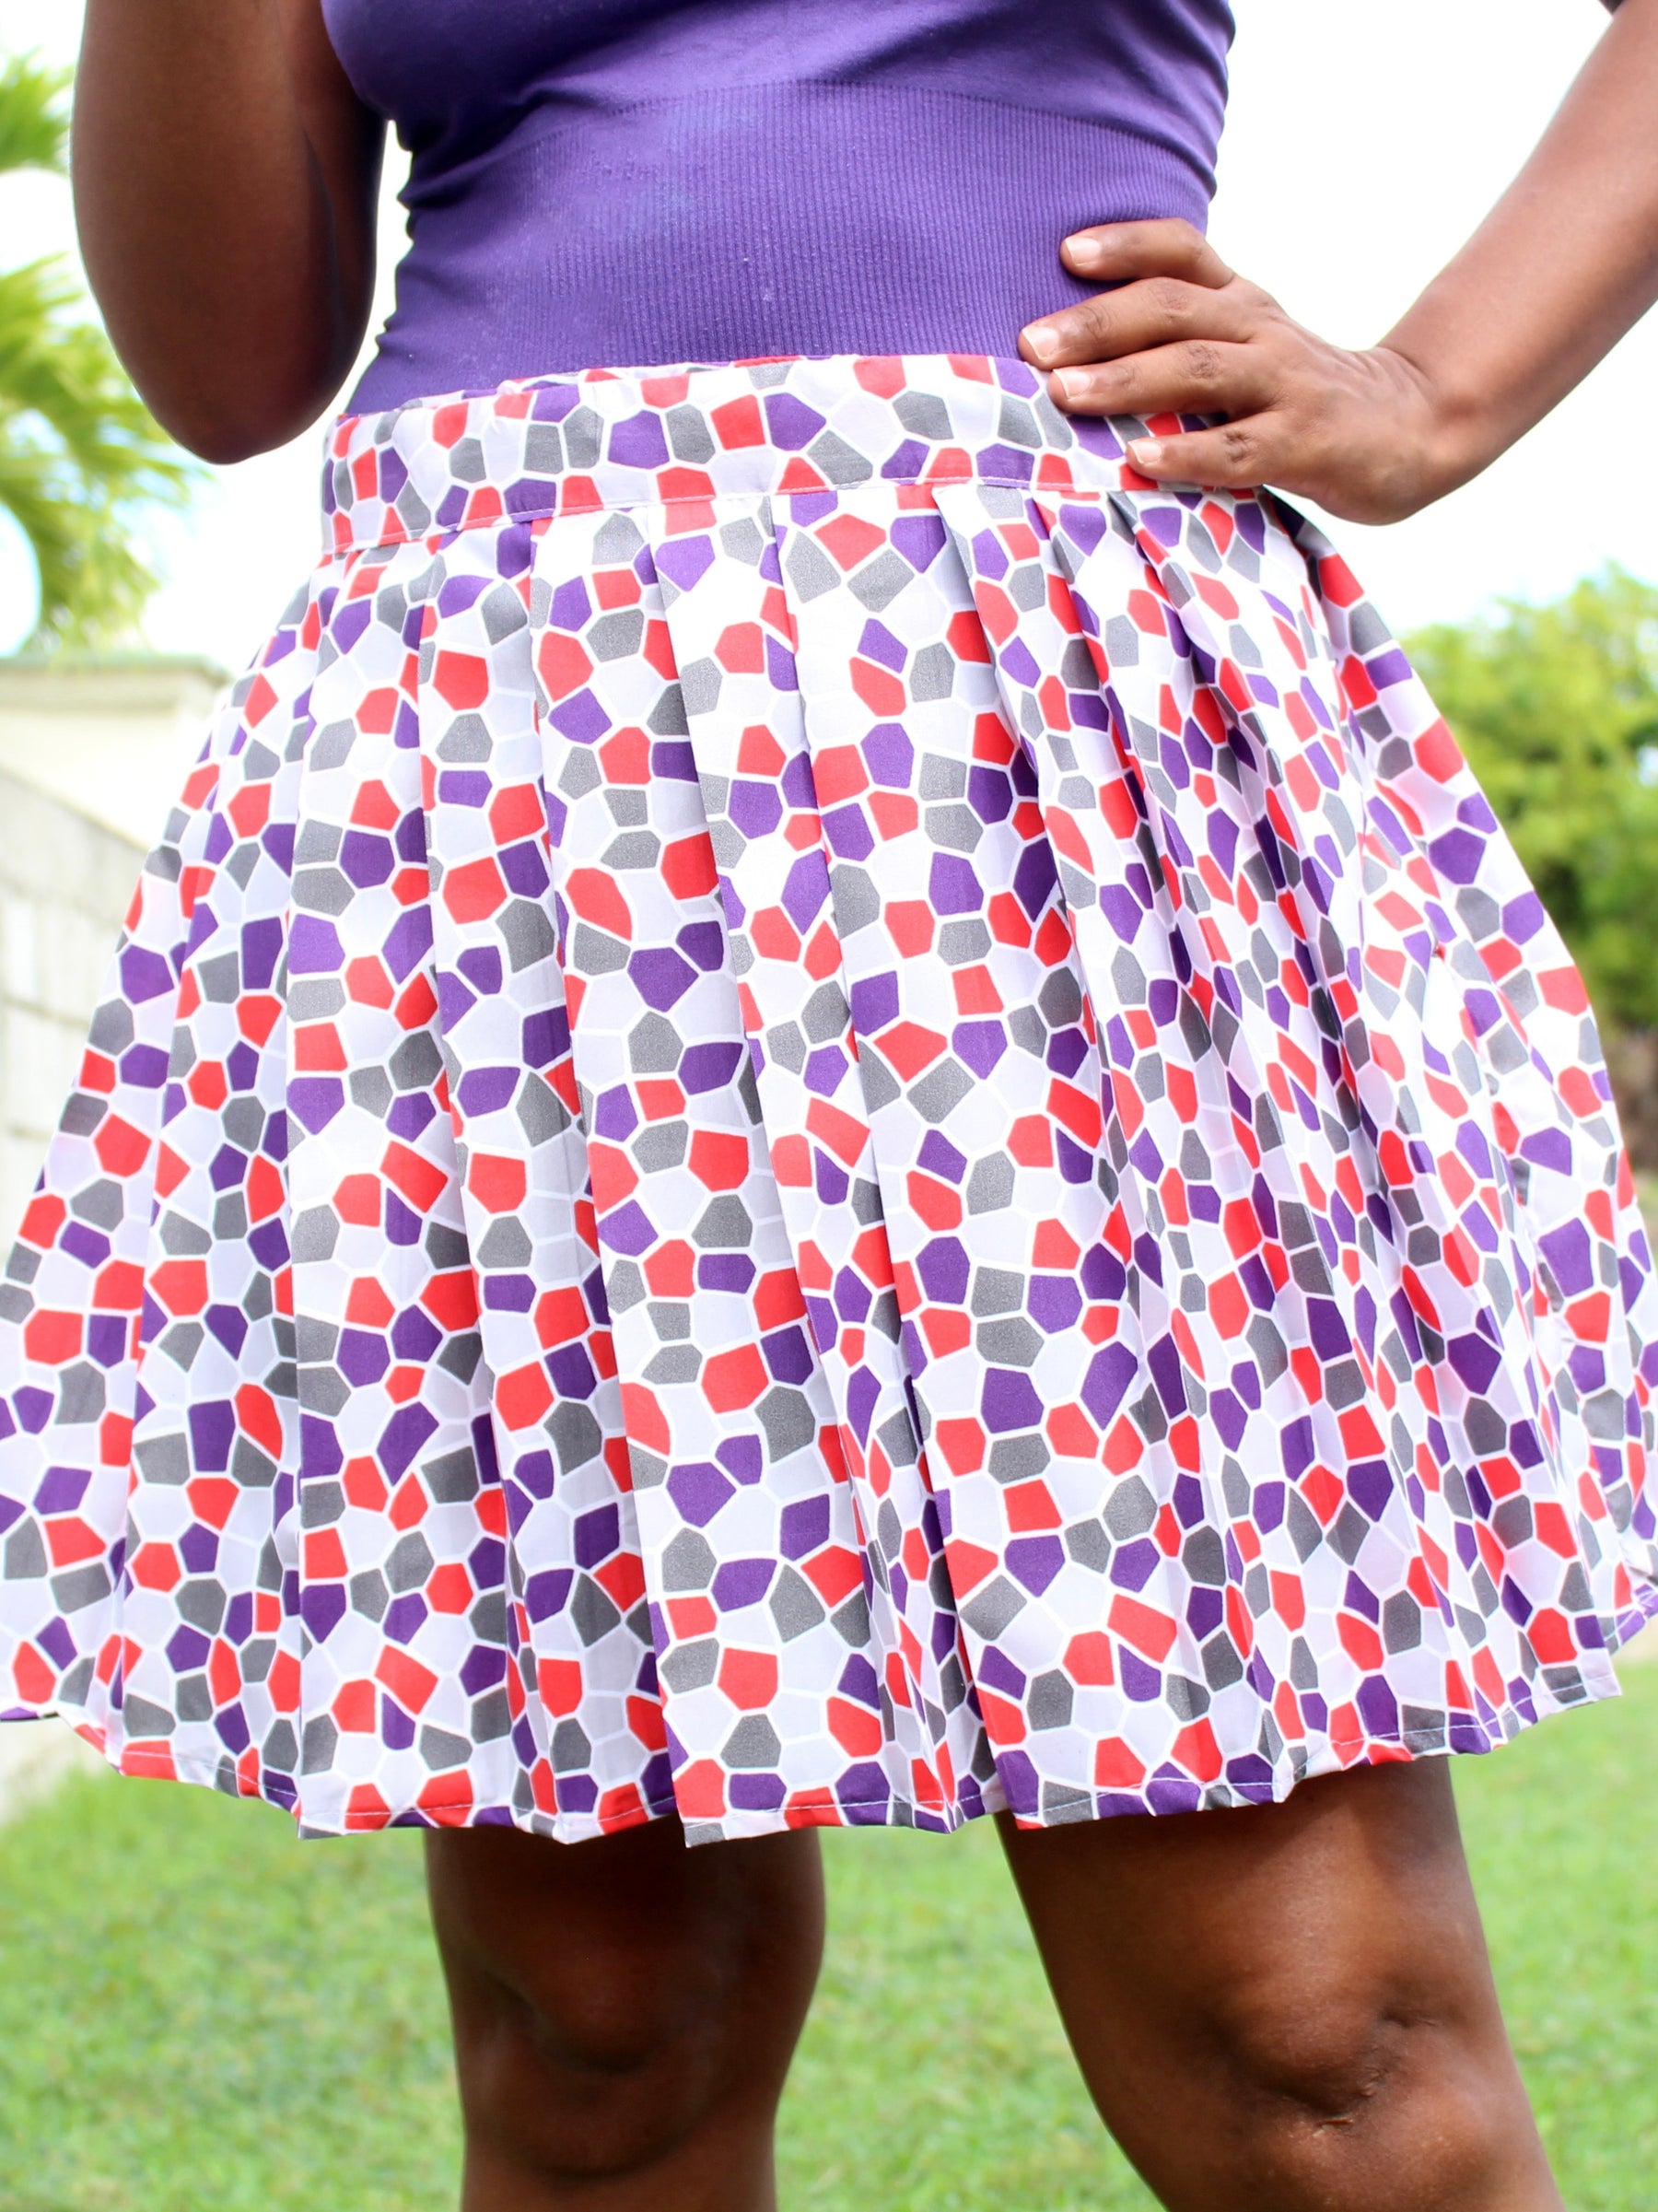 How to Draft the Basic Skirt Pattern - The Shapes of Fabric